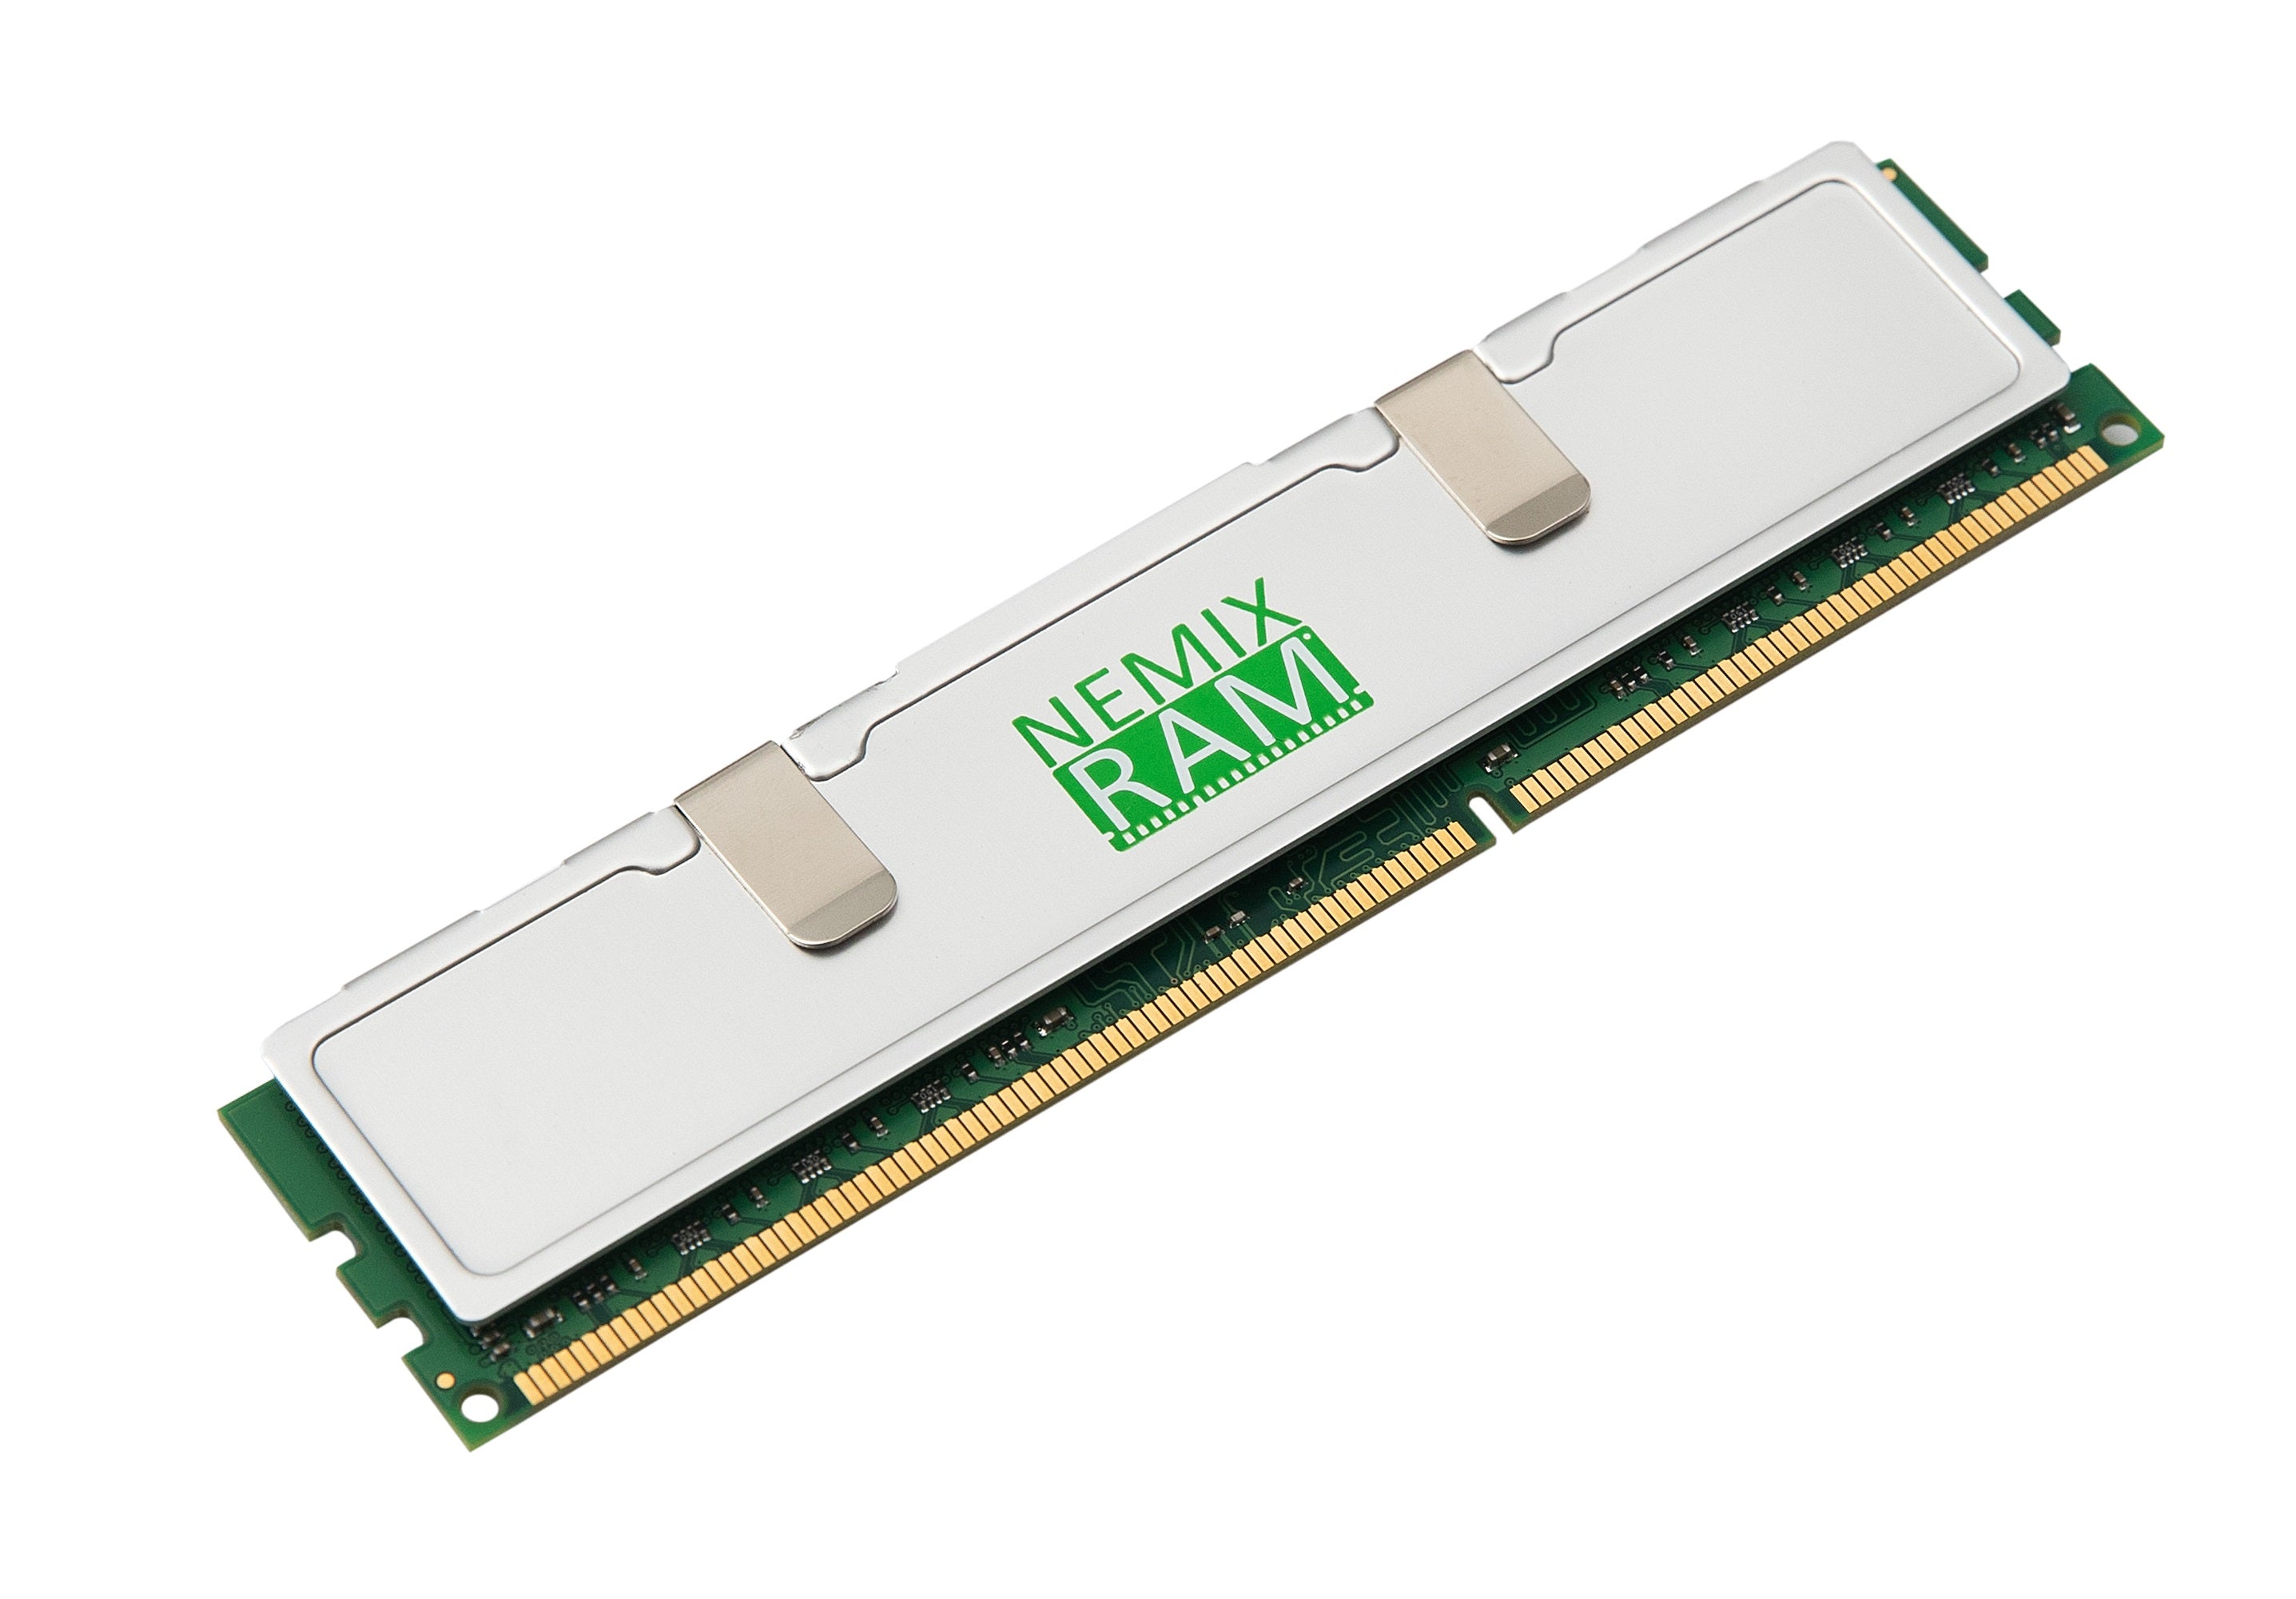 About RAM. How do I know which RAM to buy?